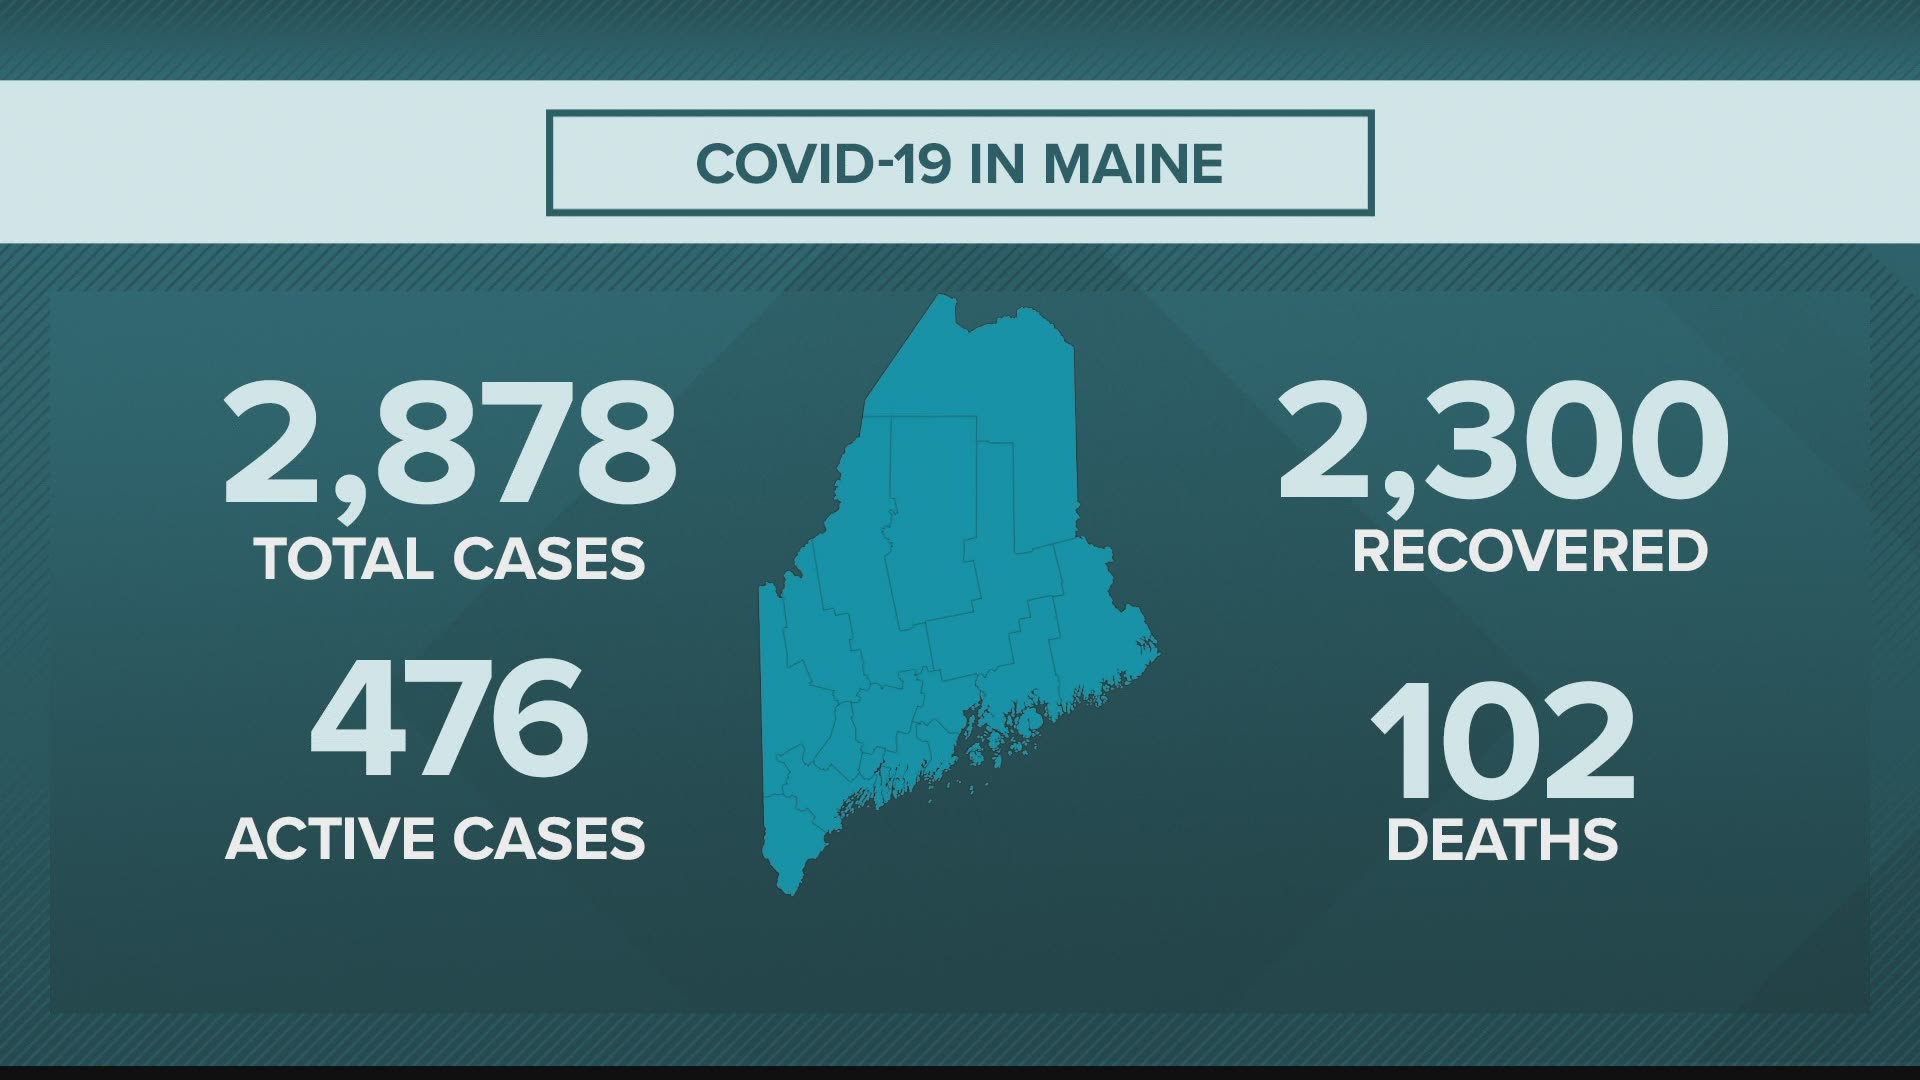 Find developments on the Maine coronavirus, COVID-19 outbreak as we work together to separate facts from fear.